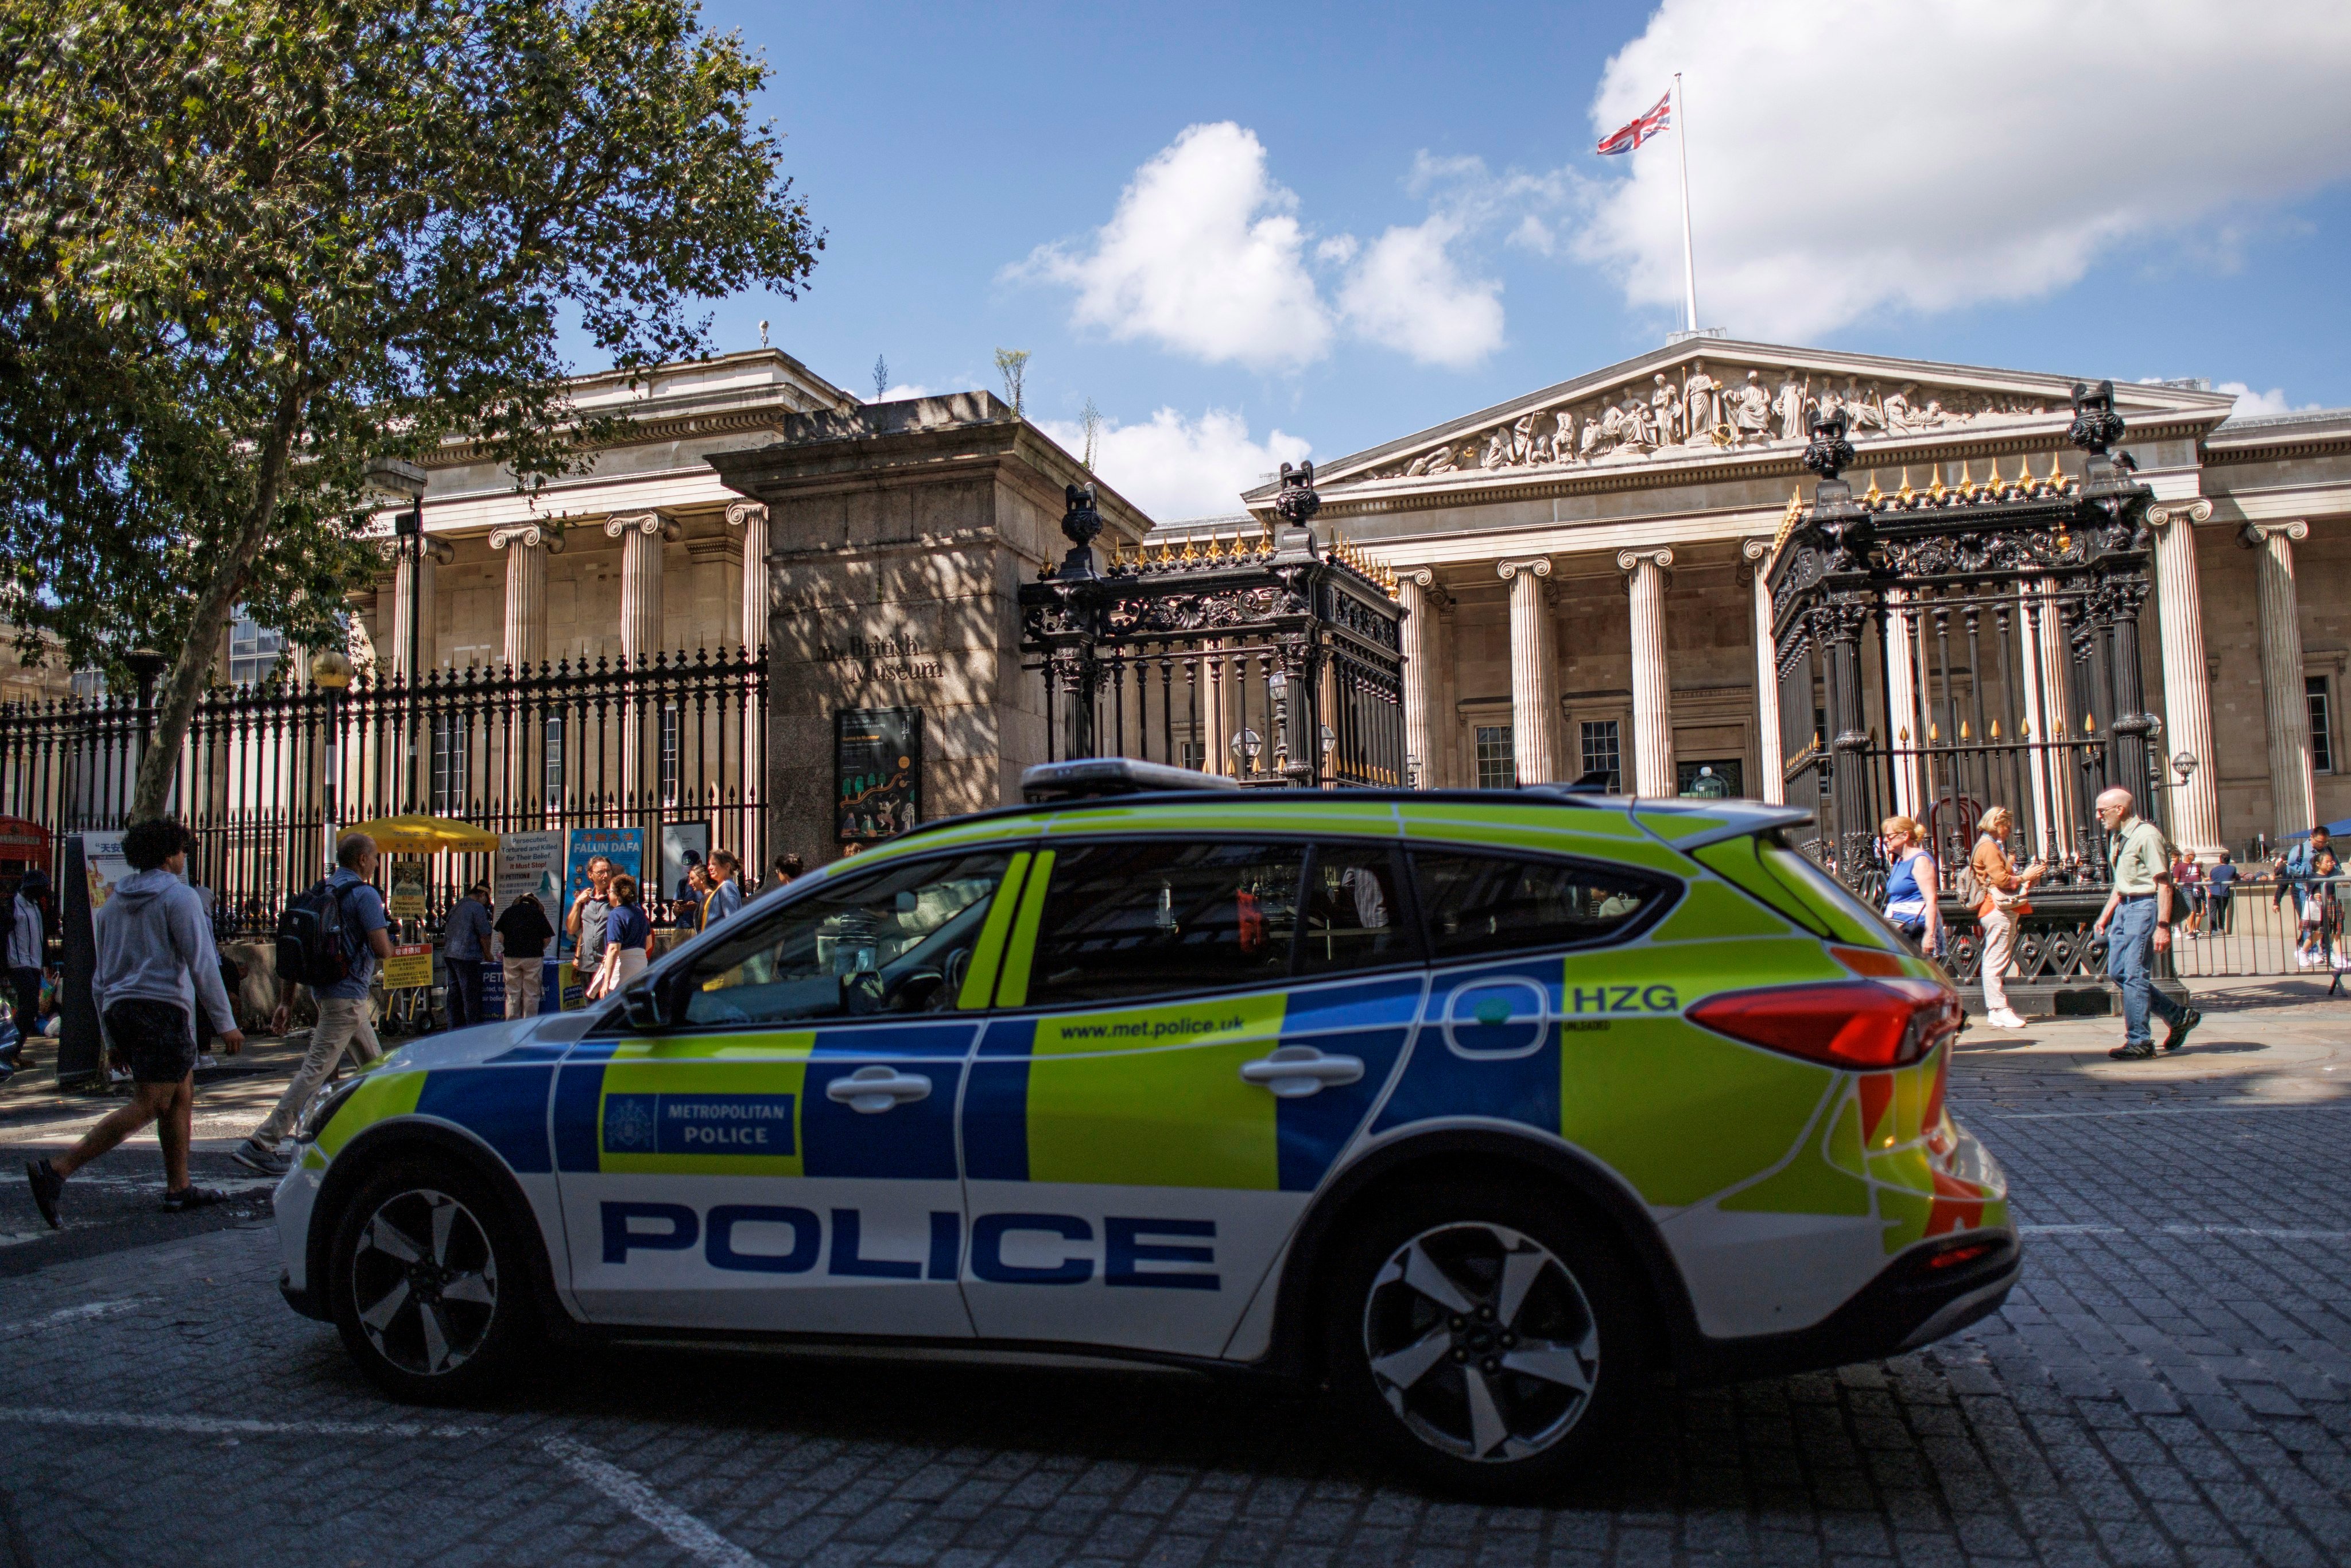 A police car patrols around the British Museum in London on August 17. Photo: EPA-EFE